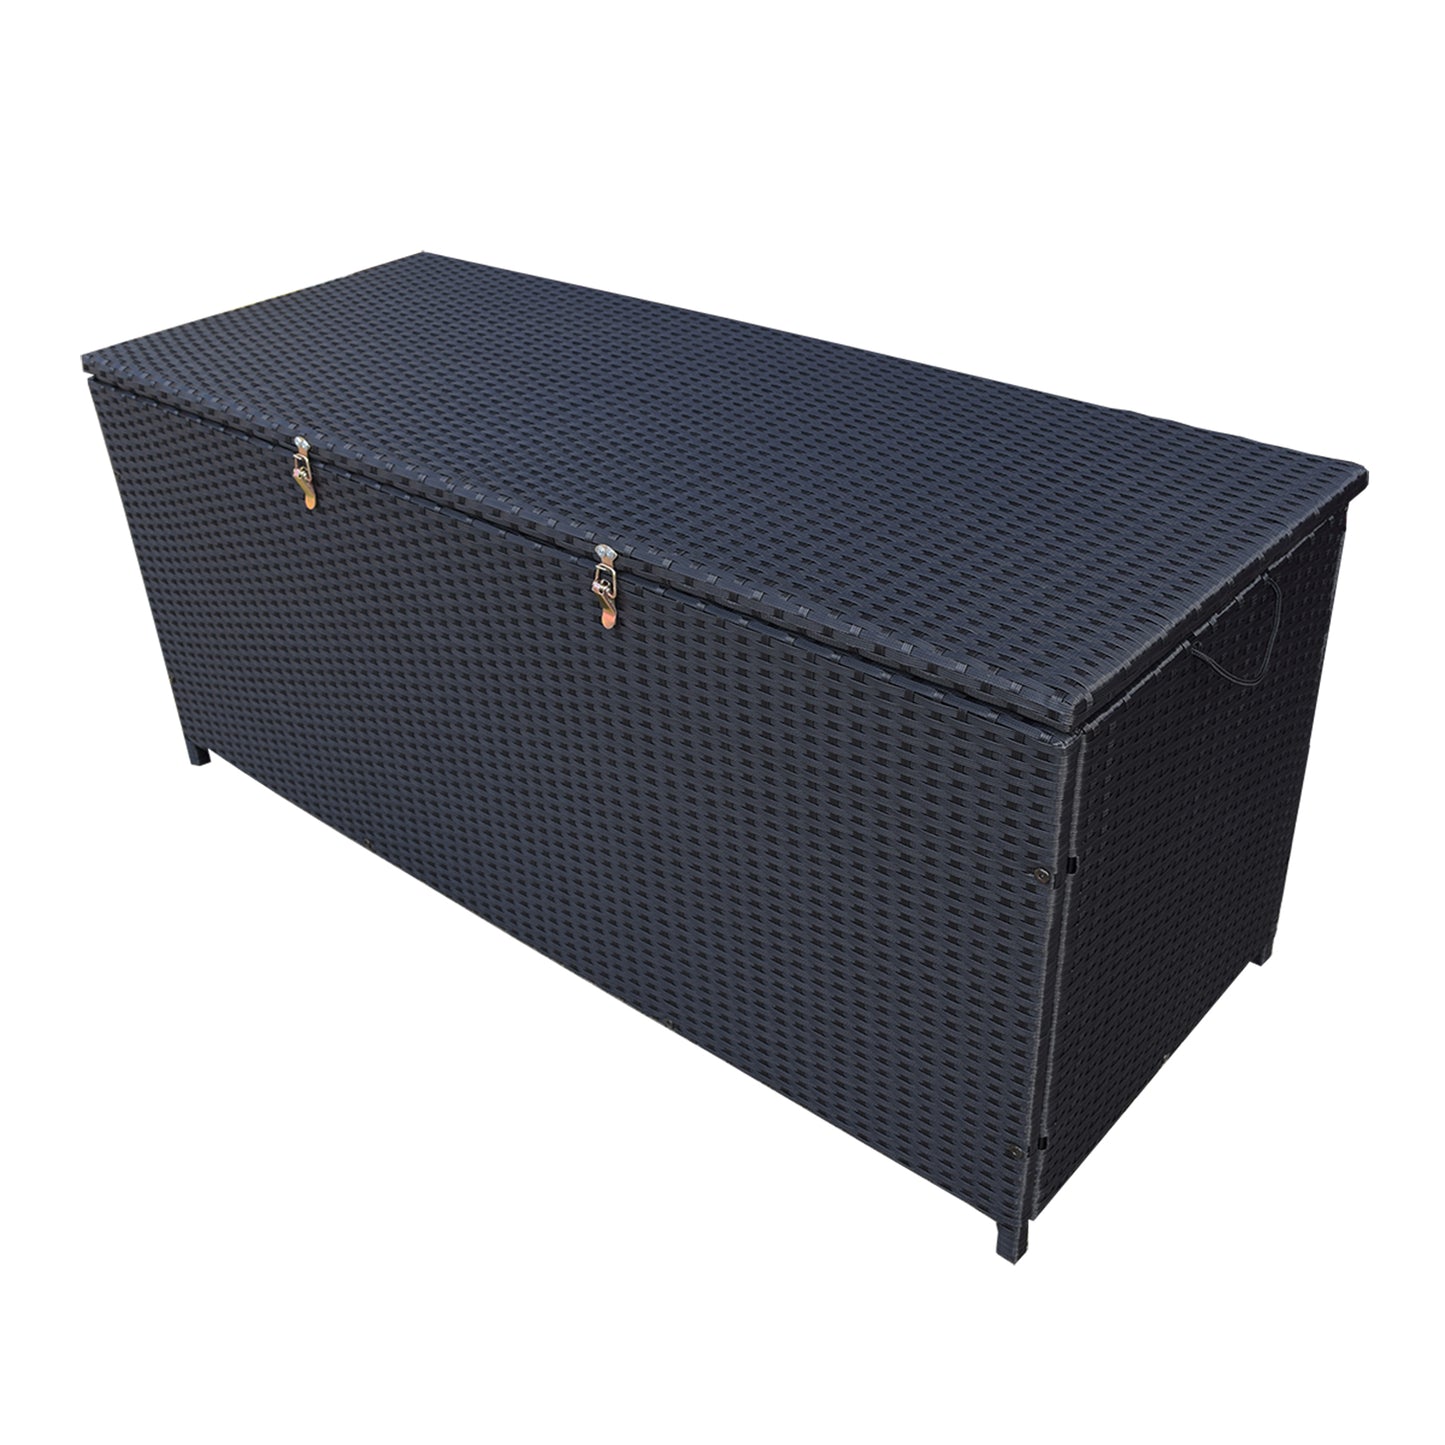 Black Wicker Patio Deck Box with 113 Gallon Storage and Metal Frame